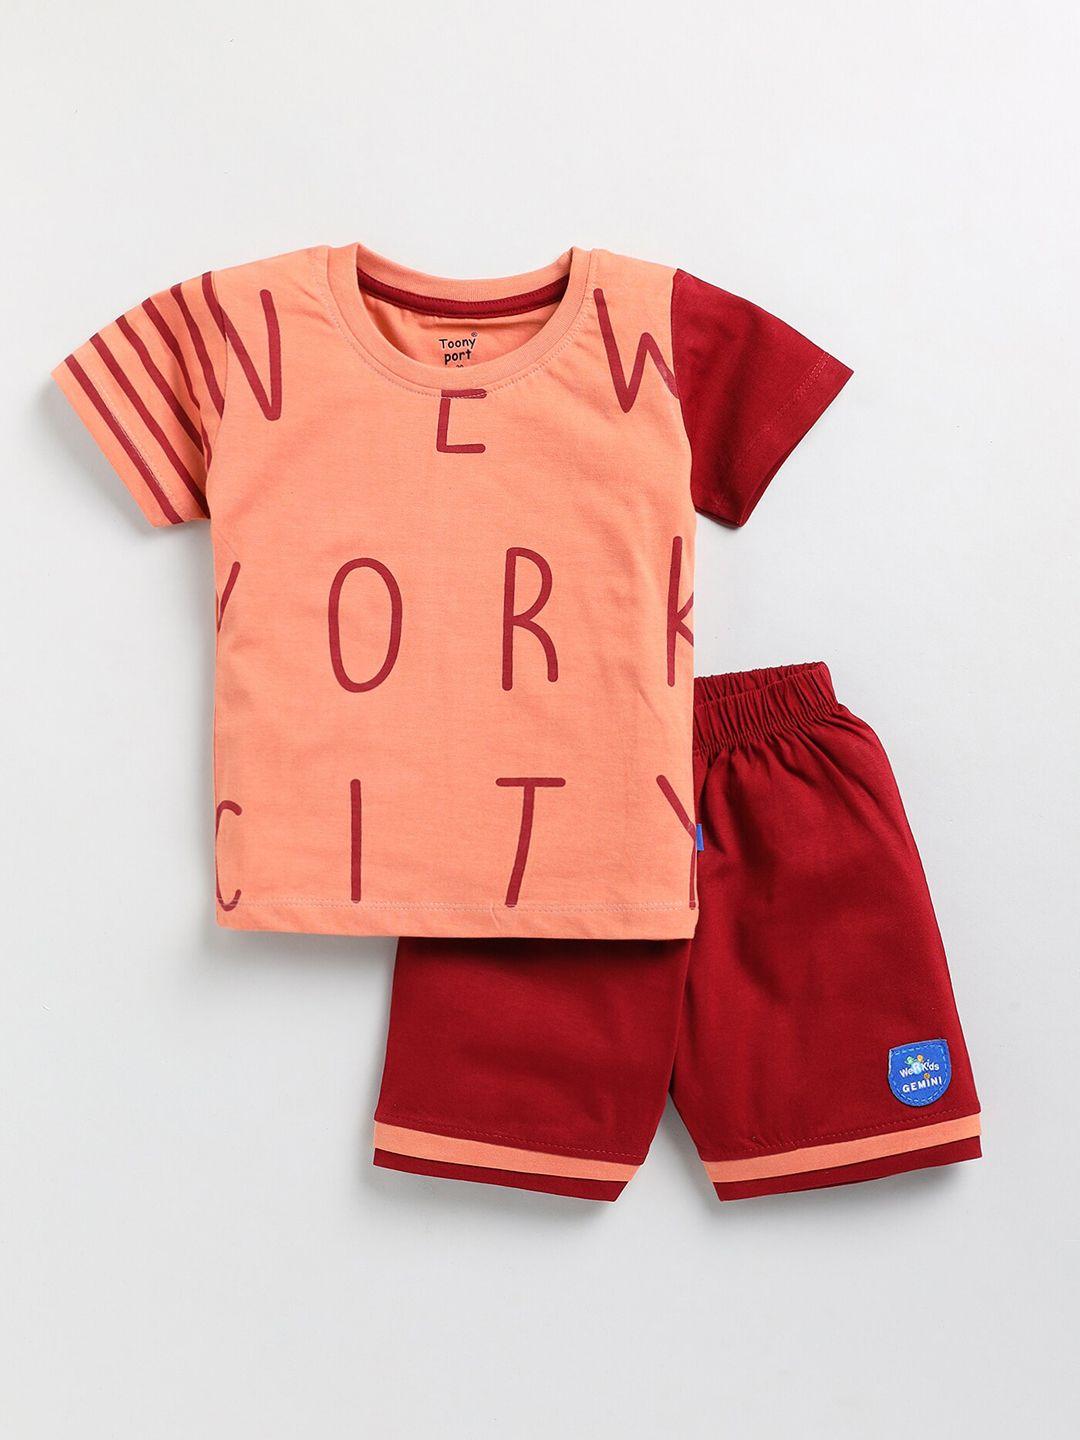 toonyport boys printed cotton t-shirt with shorts